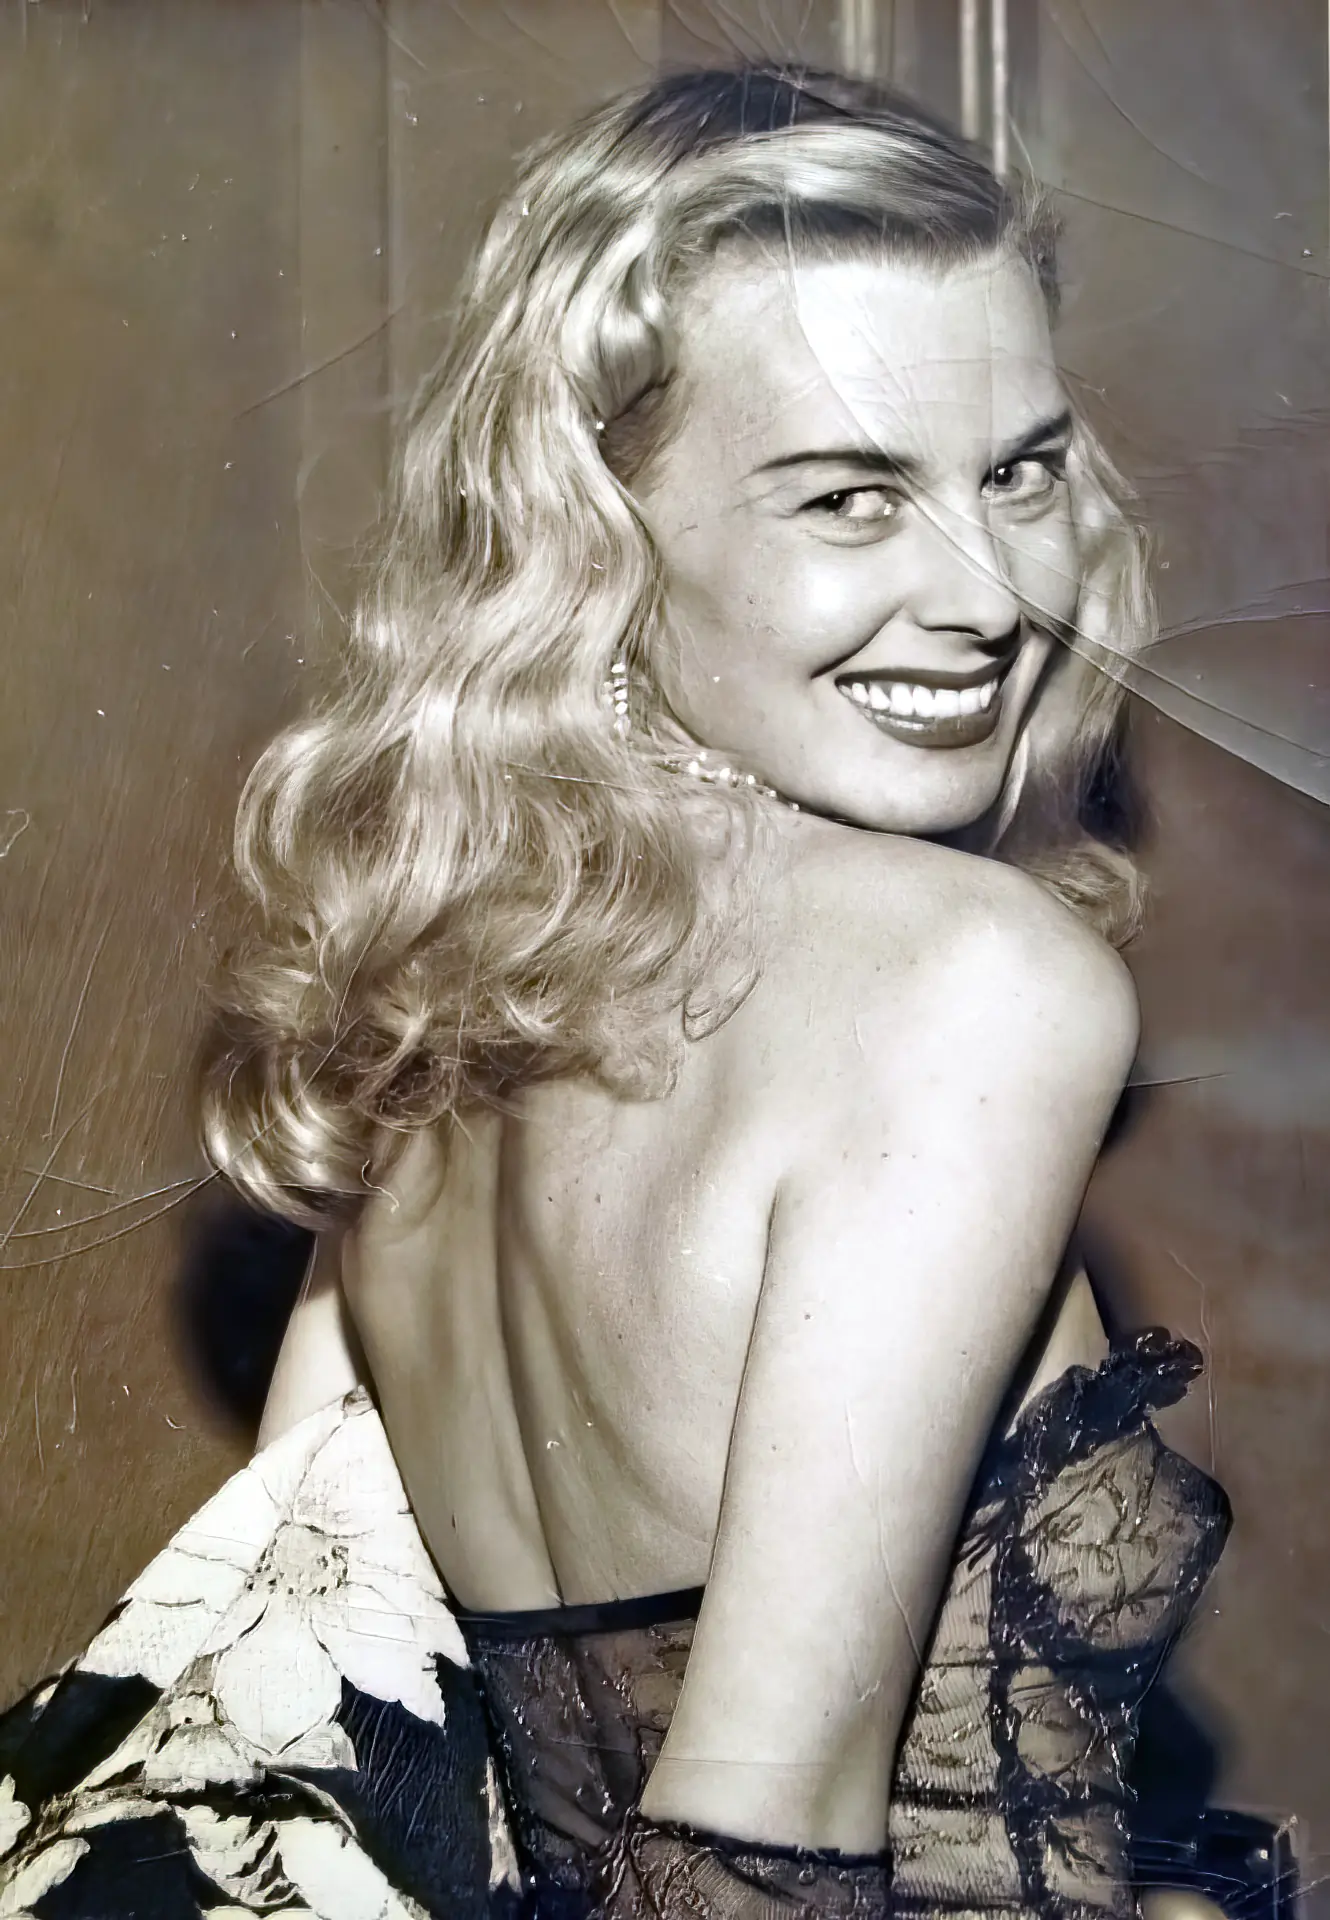 Vintage blonde in a transparent top smiles at the camera